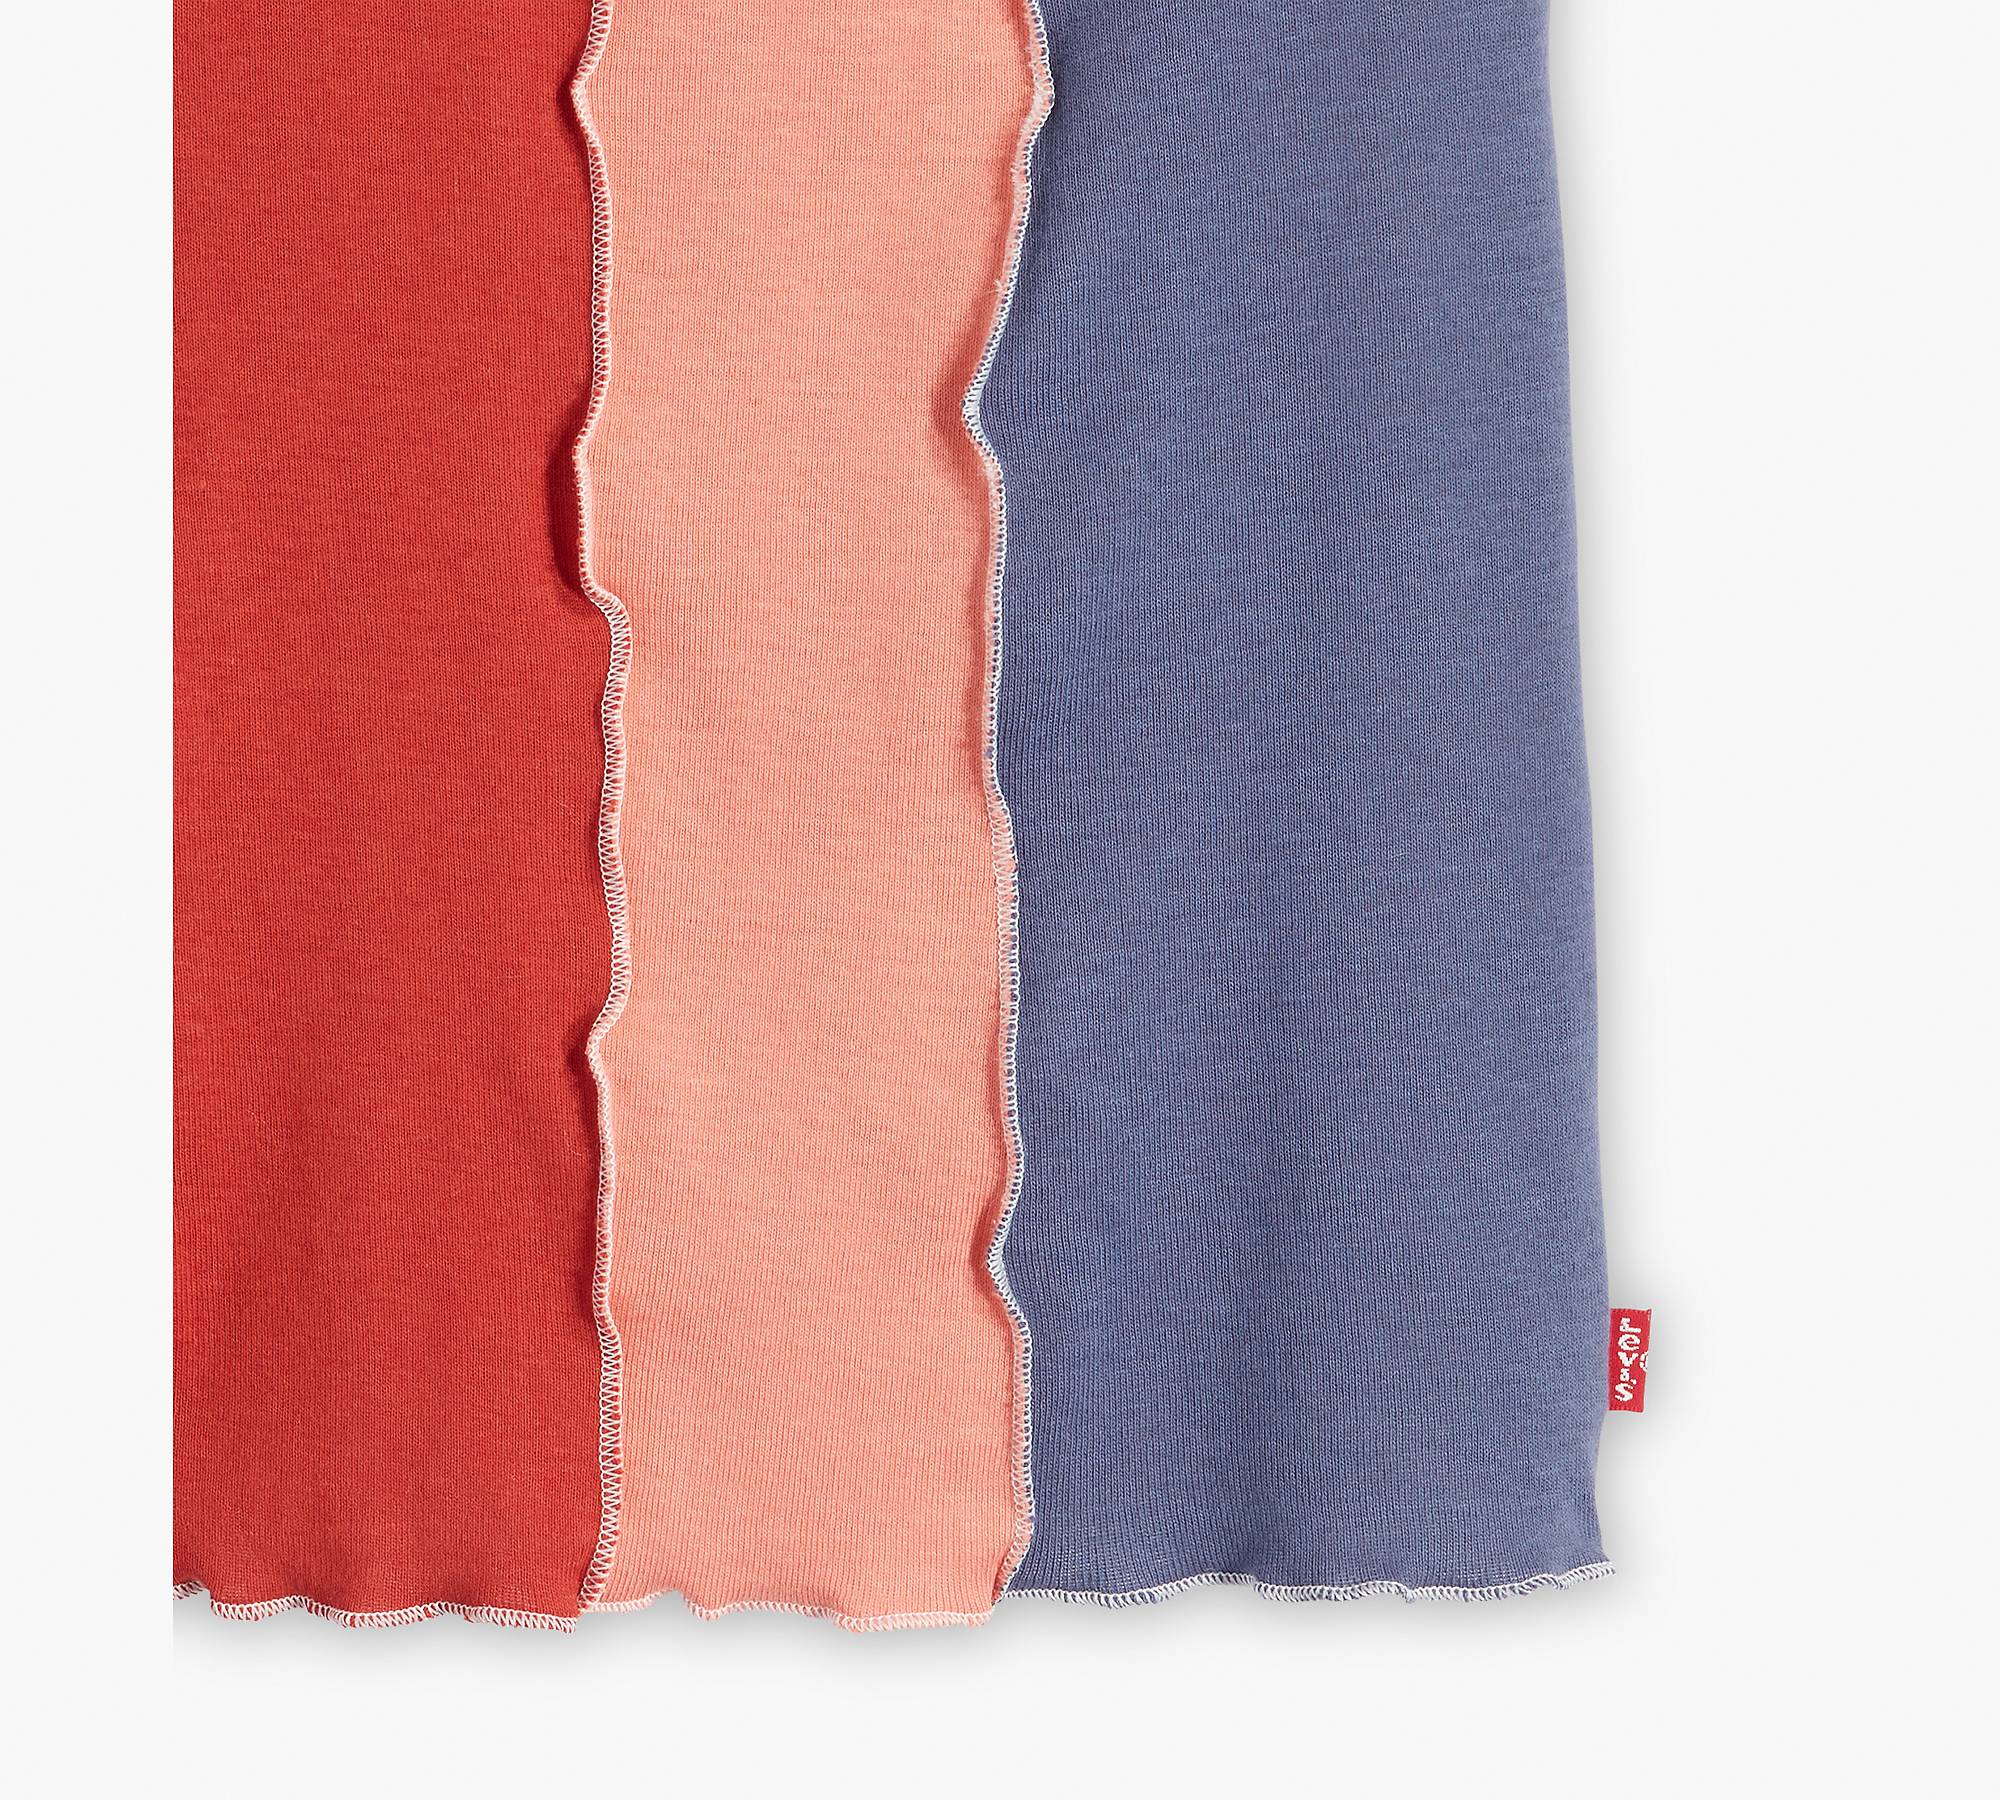 Inside Out Seamed T-shirt - Multi-color | Levi's® US